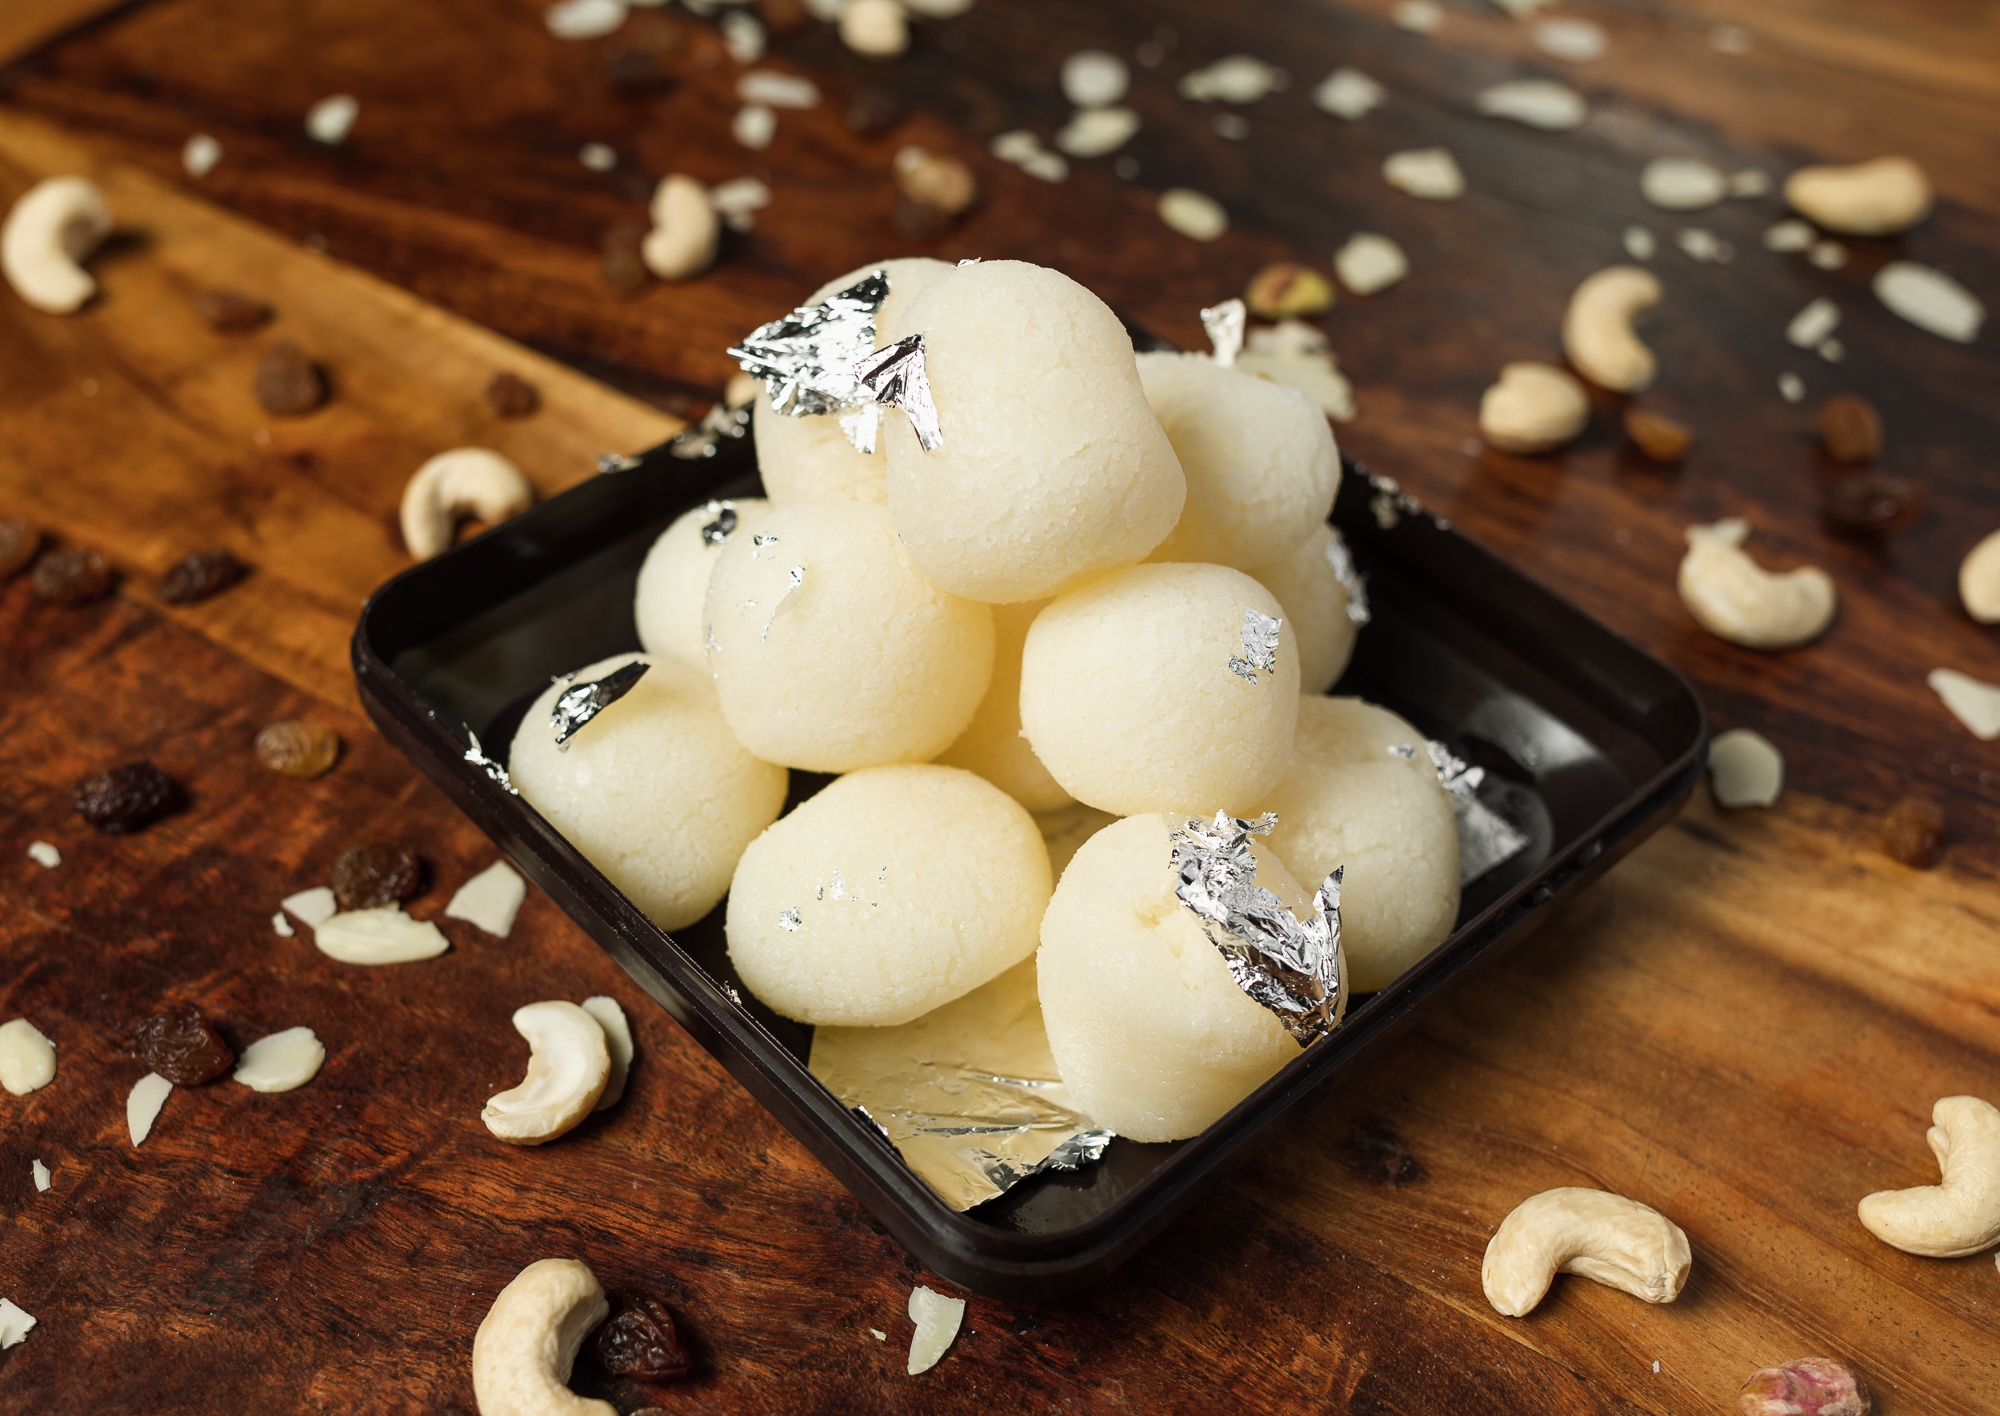 Delicious rasgulla dessert from Swagath Foods Sydney, showcasing traditional Indian sweets